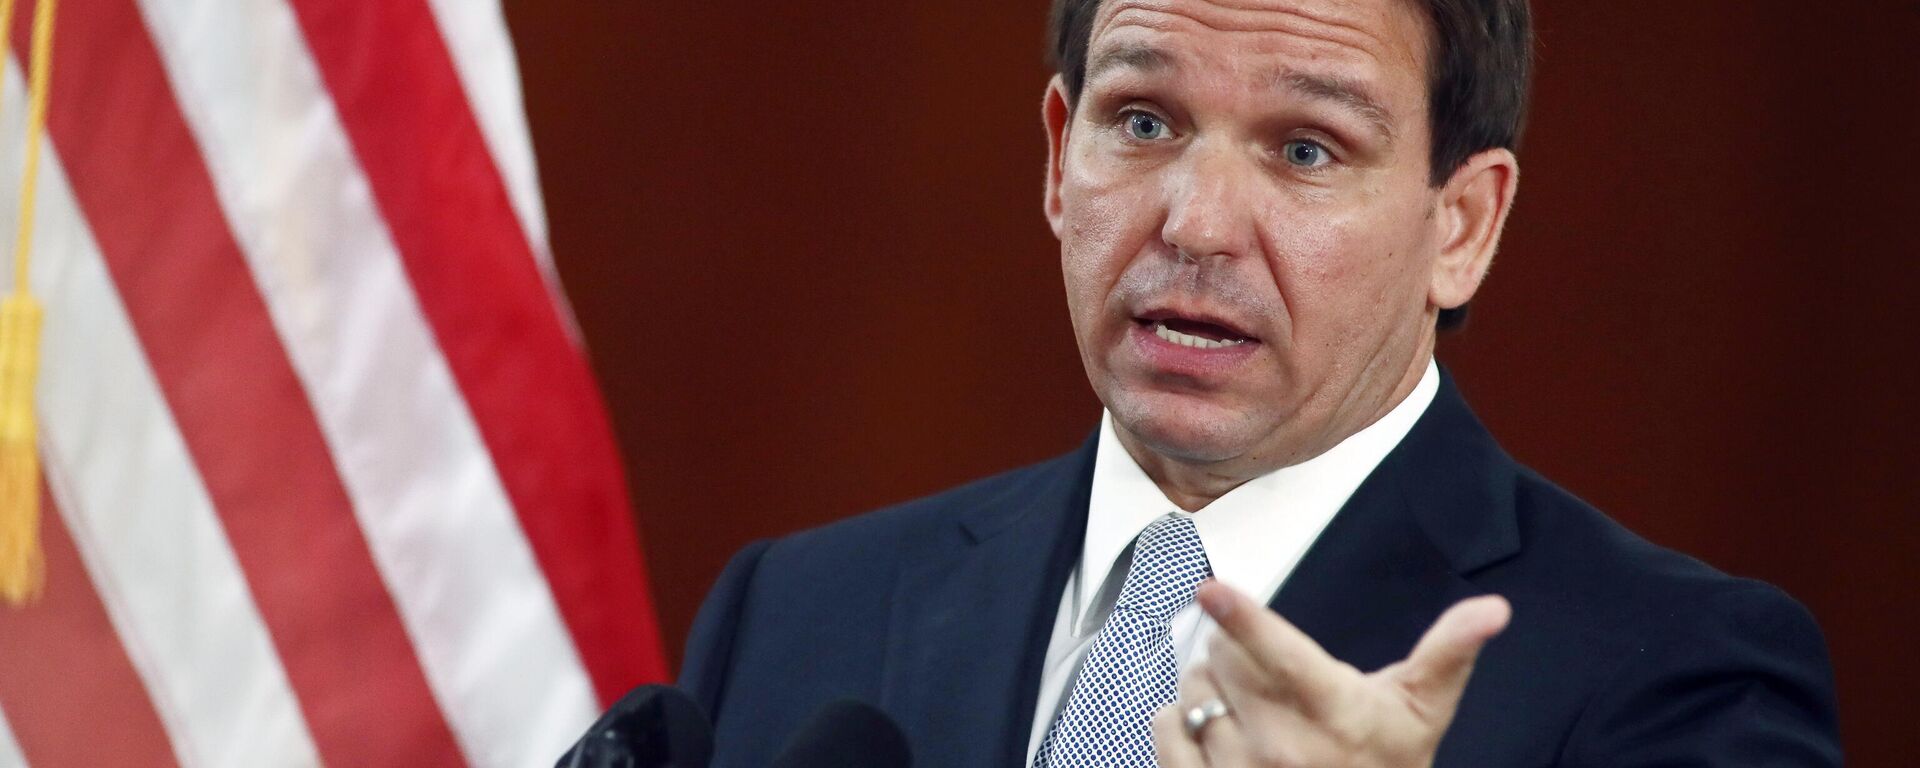 Florida Gov. Ron DeSantis answers questions from the media in the Florida Cabinet following his State of the State address during a joint session of the Senate and House of Representatives Tuesday, March 7, 2023, at the Capitol in Tallahassee, Fla. - Sputnik International, 1920, 14.03.2023